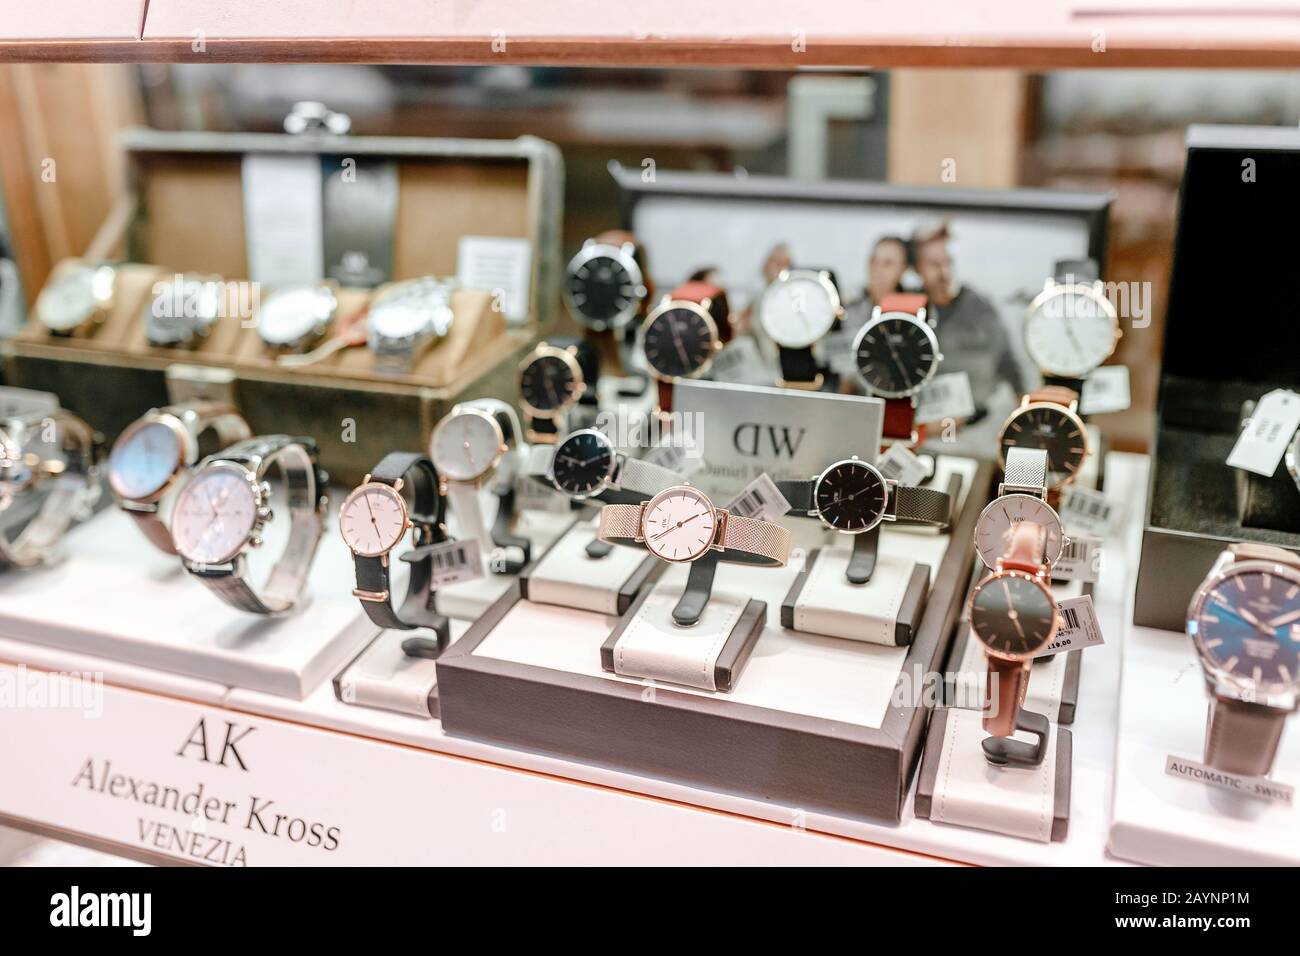 Daniel Wellington High Resolution Stock Photography and Images - Alamy